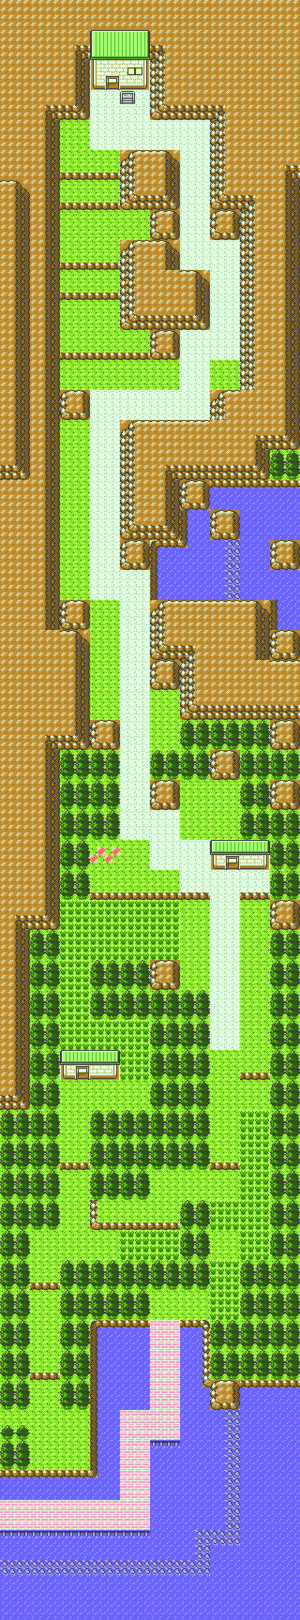 Kanto Route 26 GSC.png